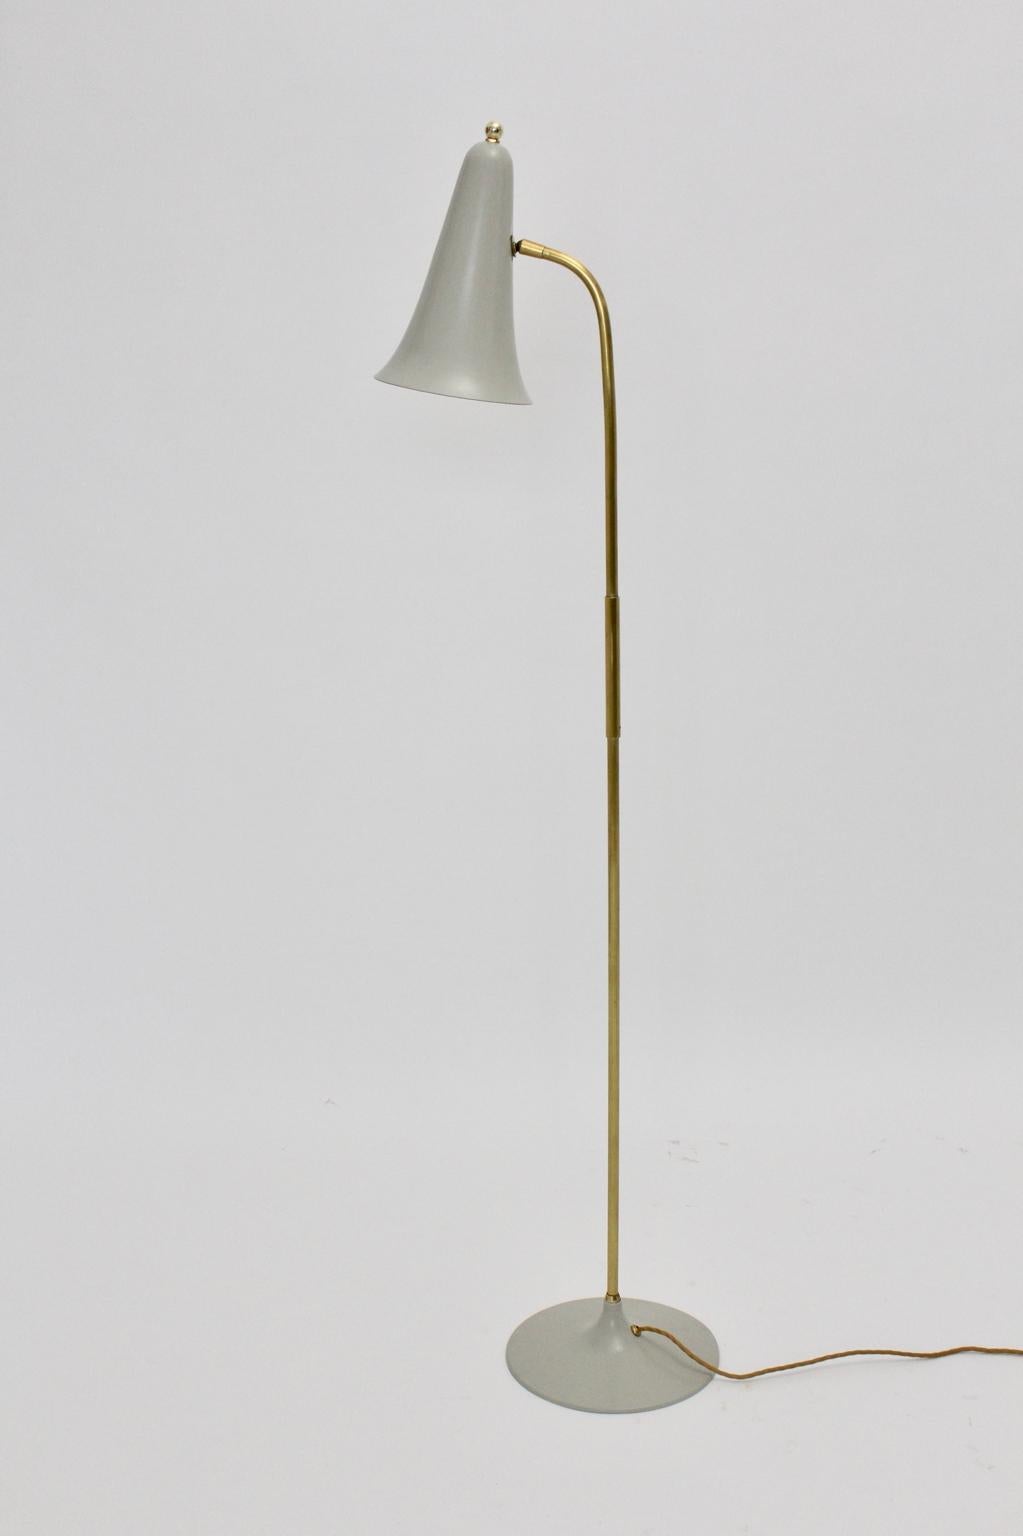 The Scandinavian Modern era stands for reduced forms and shapes.
This presented floor lamp shows these great attitudes.
Additionally the floor lamp combines elegance and coolness.
Also the floor lamp was made of a grey lacquered cast iron trumpet